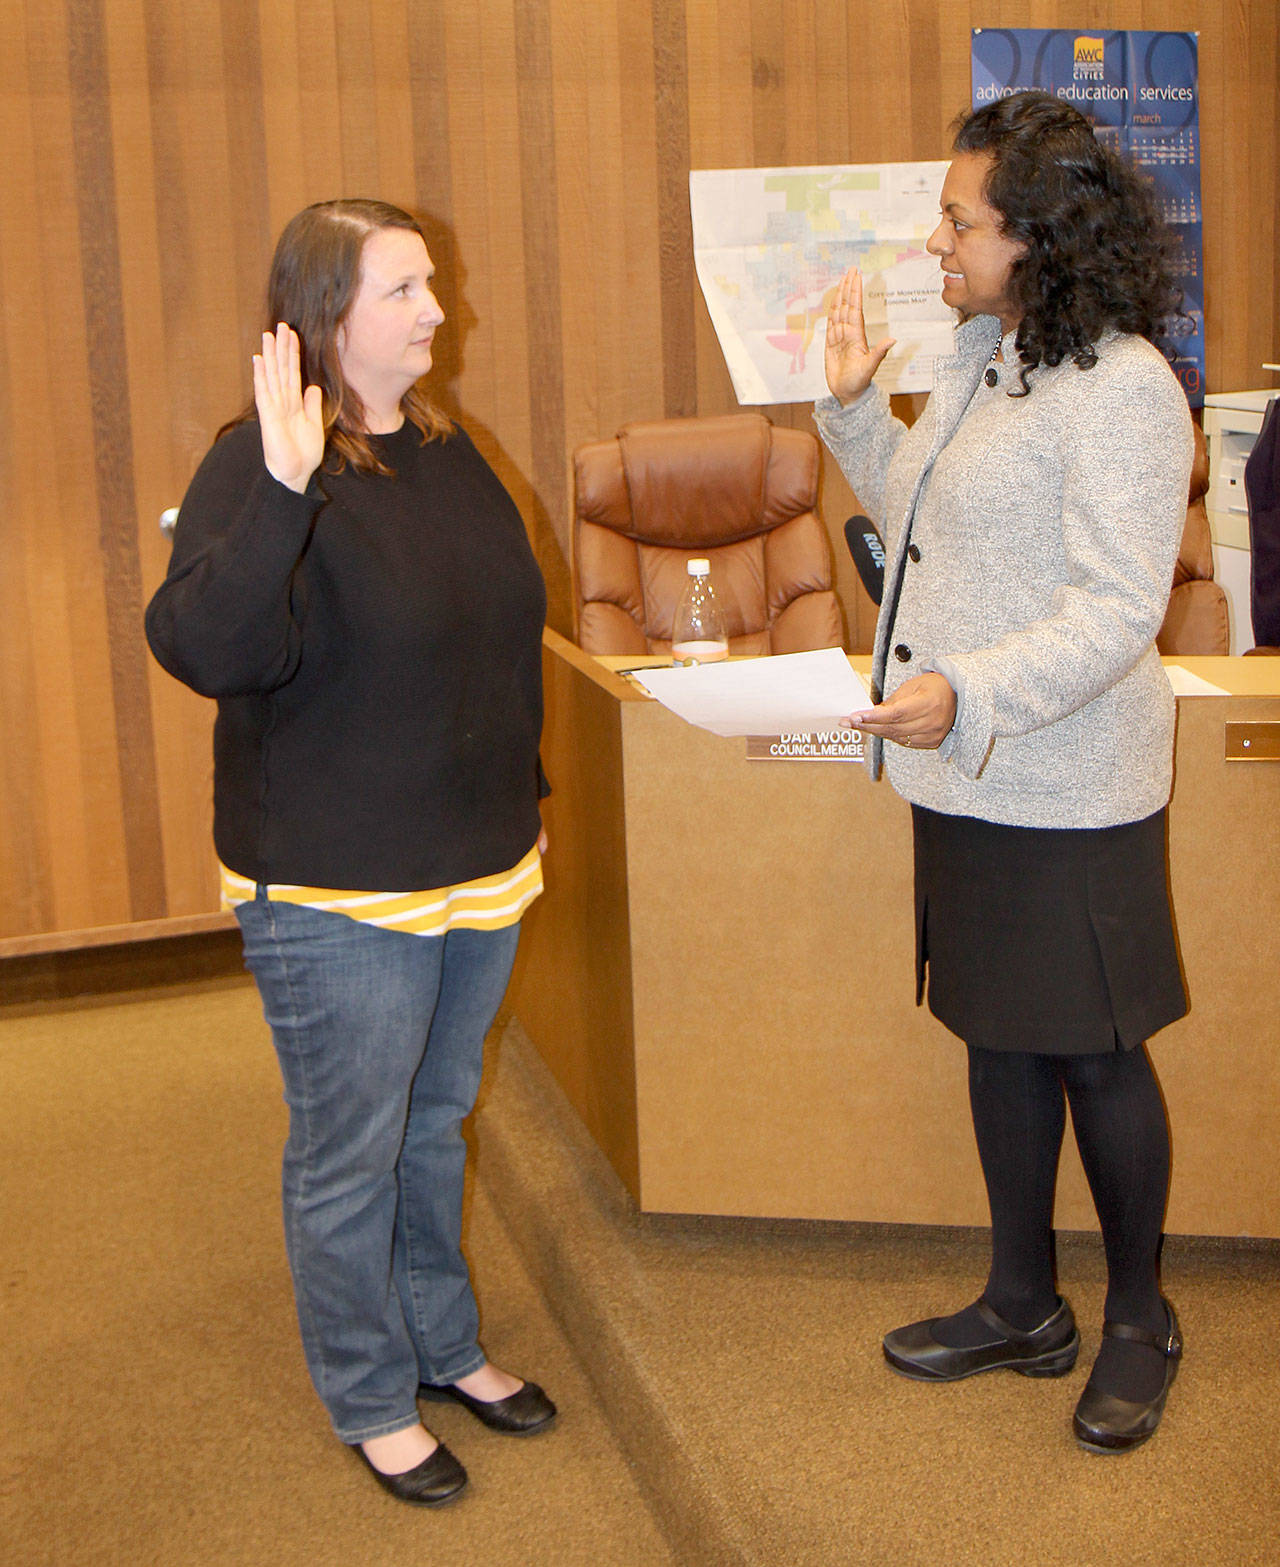 New Montesano City Council Member Megan Valentine (left) is sworn in by Mayor Vini Salmuel after being unanimously selected by the council to fill Robert Hatley’s Position 5 seat at the Tuesday, April 9, 2019, meeting at City Hall in Montesano, Washington. (Michael Lang | Grays Harbor News Group)